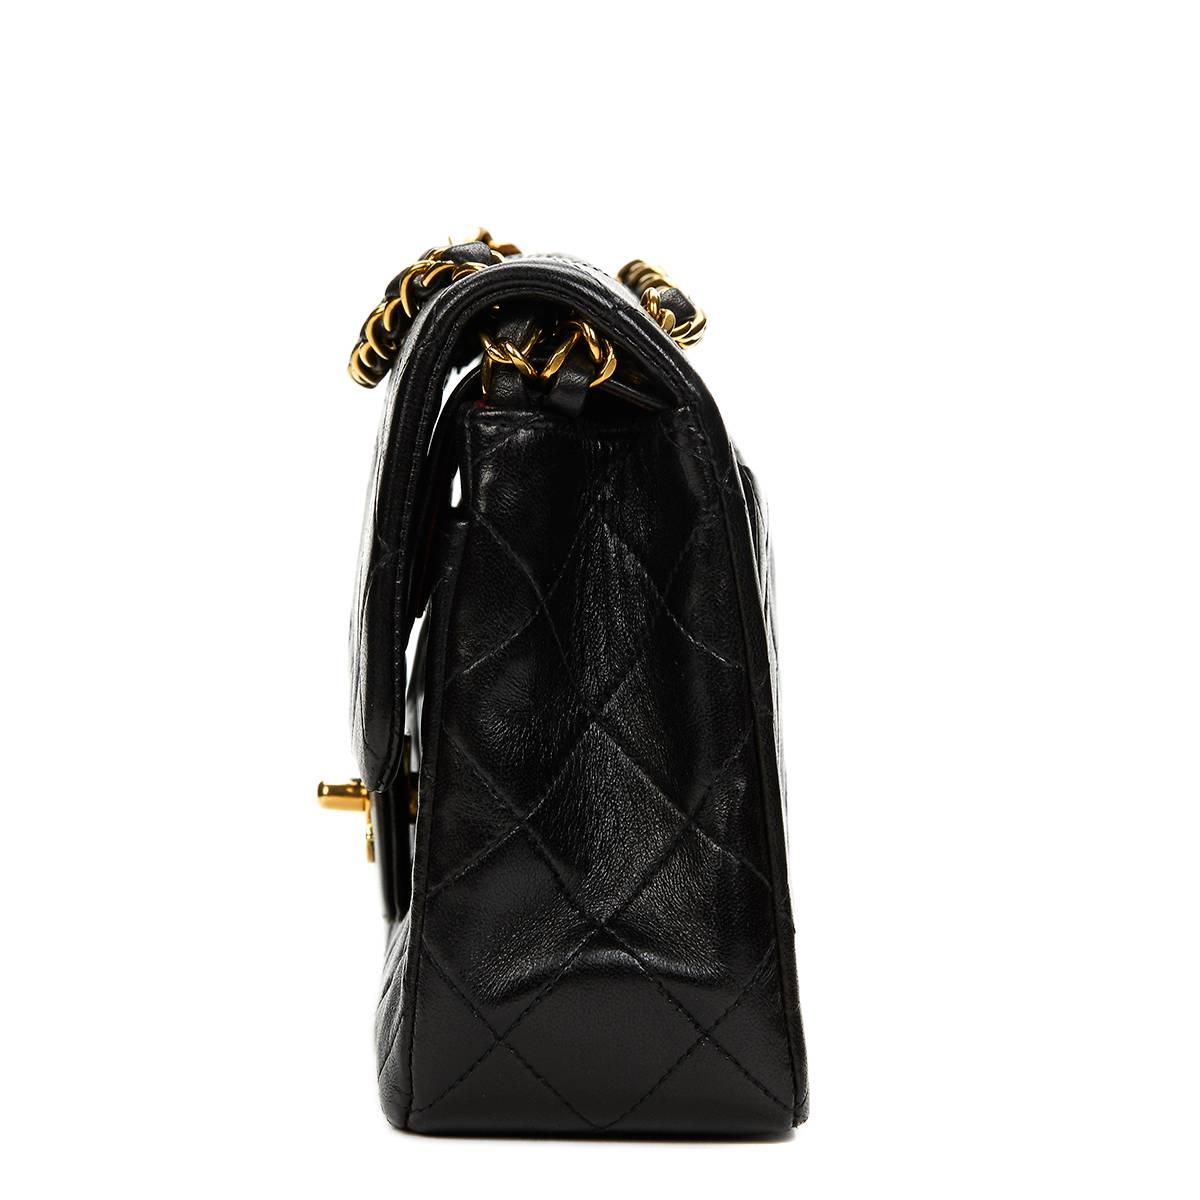 CHANEL
Black Quilted Lambskin Vintage Small Classic Double Flap Bag

This CHANEL Small Classic Double Flap Bag is in Very Good Pre-Owned Condition accompanied by Authenticity Card. Circa 1995. Primarily made from Lambskin Leather complimented by